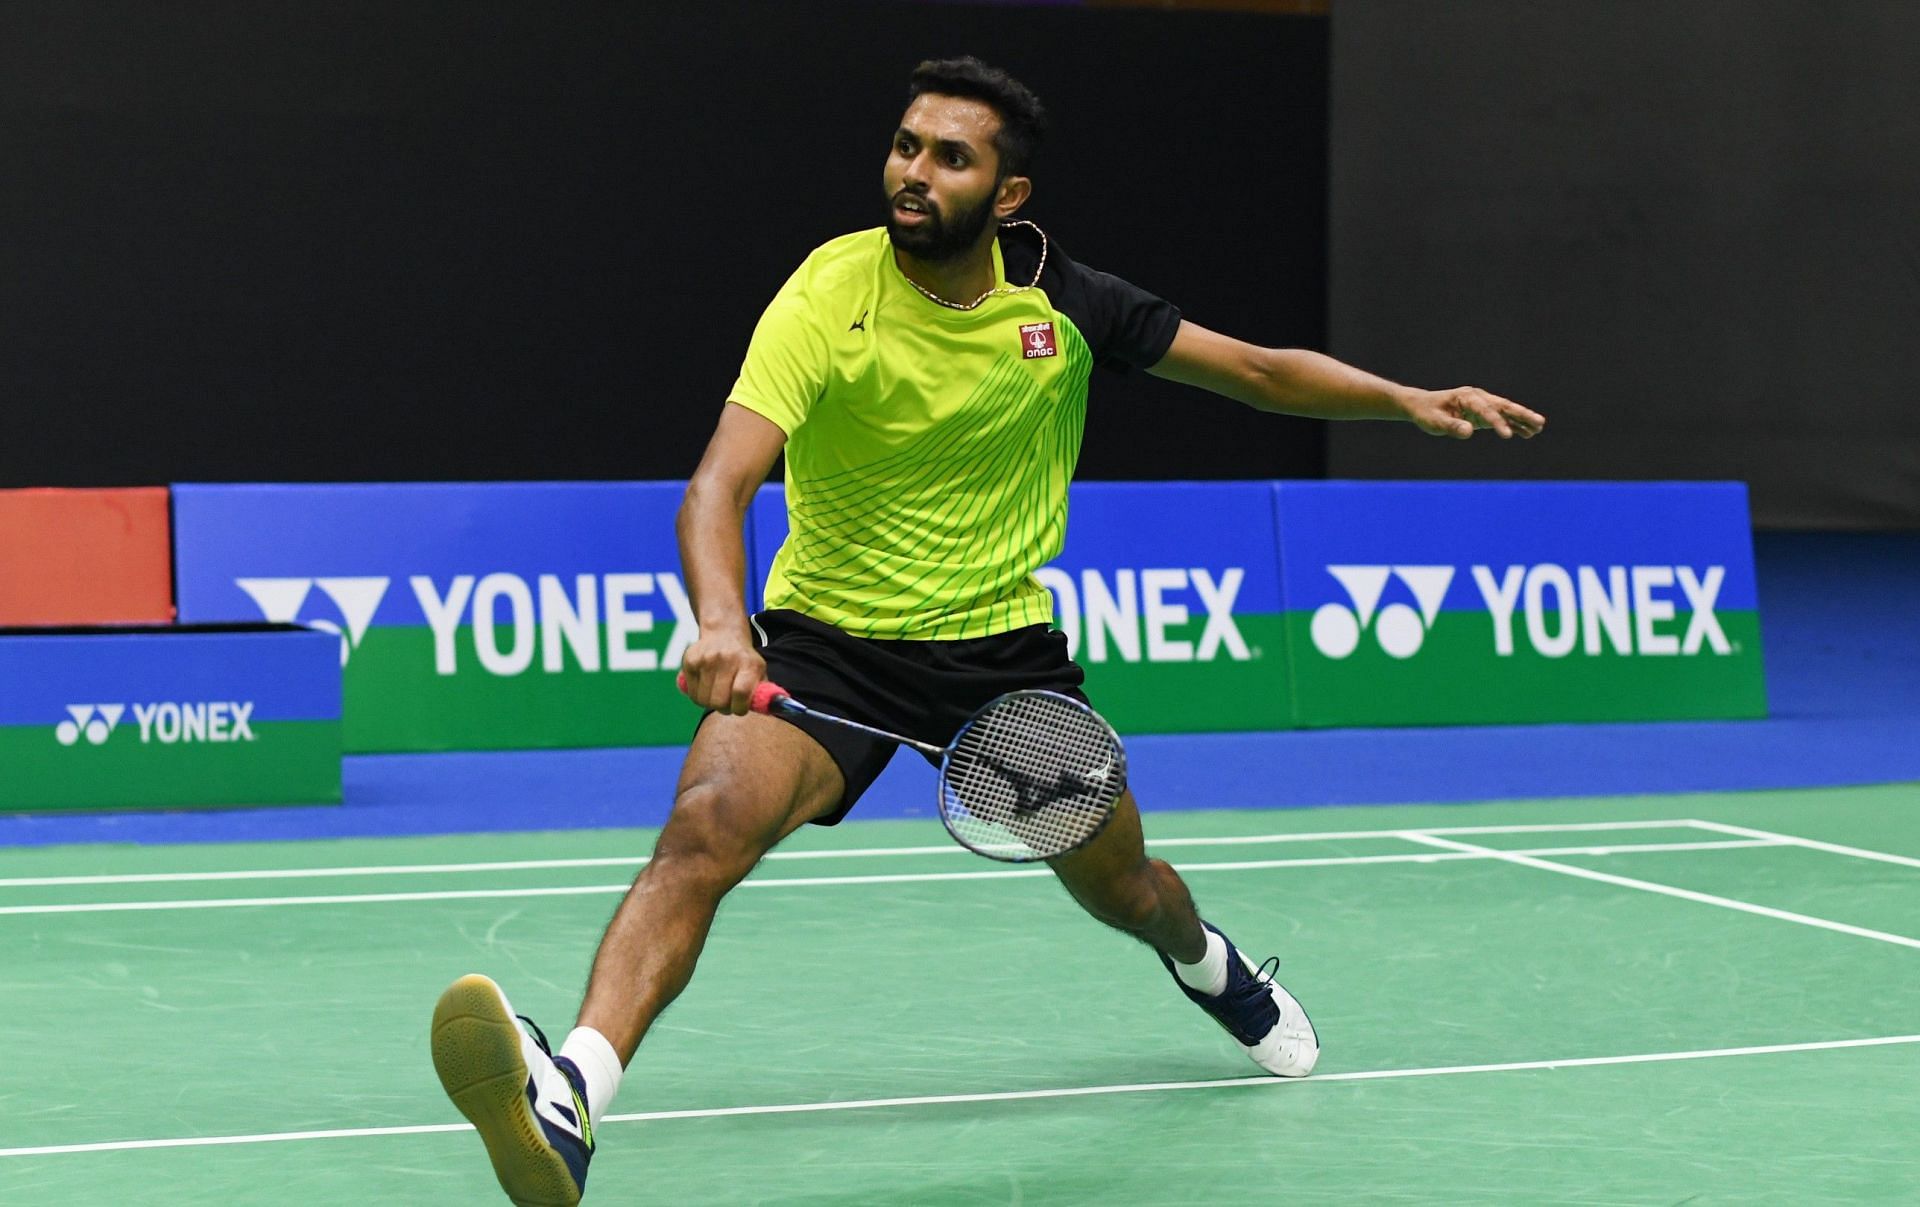 HS Prannoy beat Kidambi Srikanth to win his maiden Senior National Badminton title in Nagpur in 2017. The Senior National venue Divisional Sports Complex Mankarpur has facilities to host international events. (Pic credit: BAI)